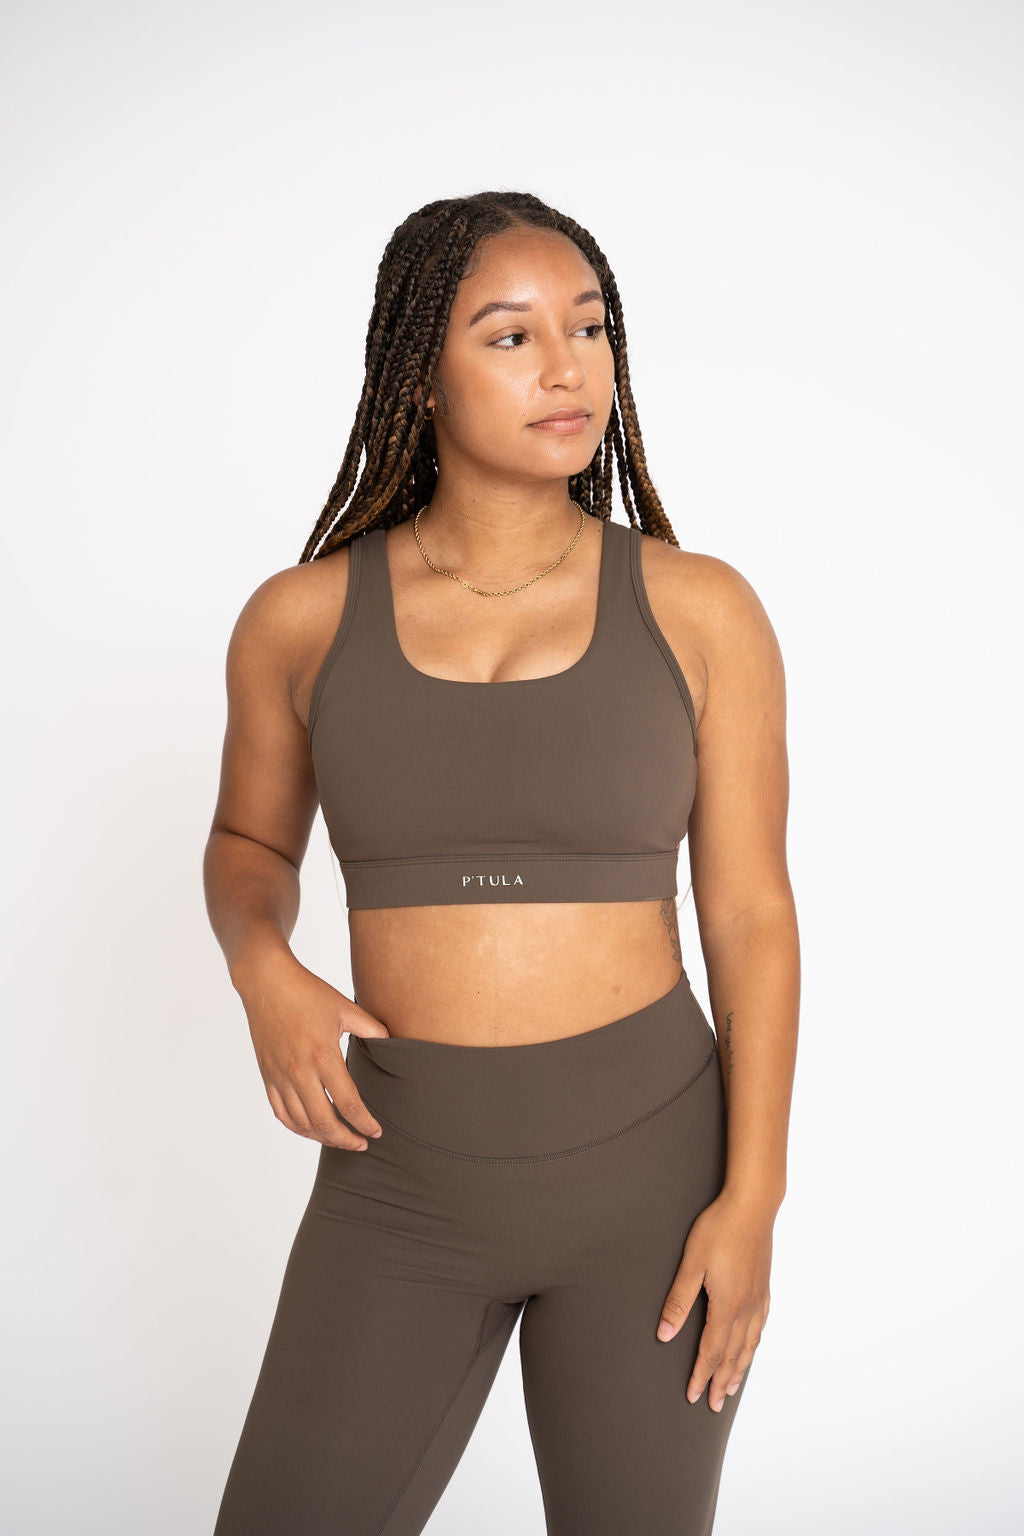 Buy Supportive Sports Bra Online At Aquilla